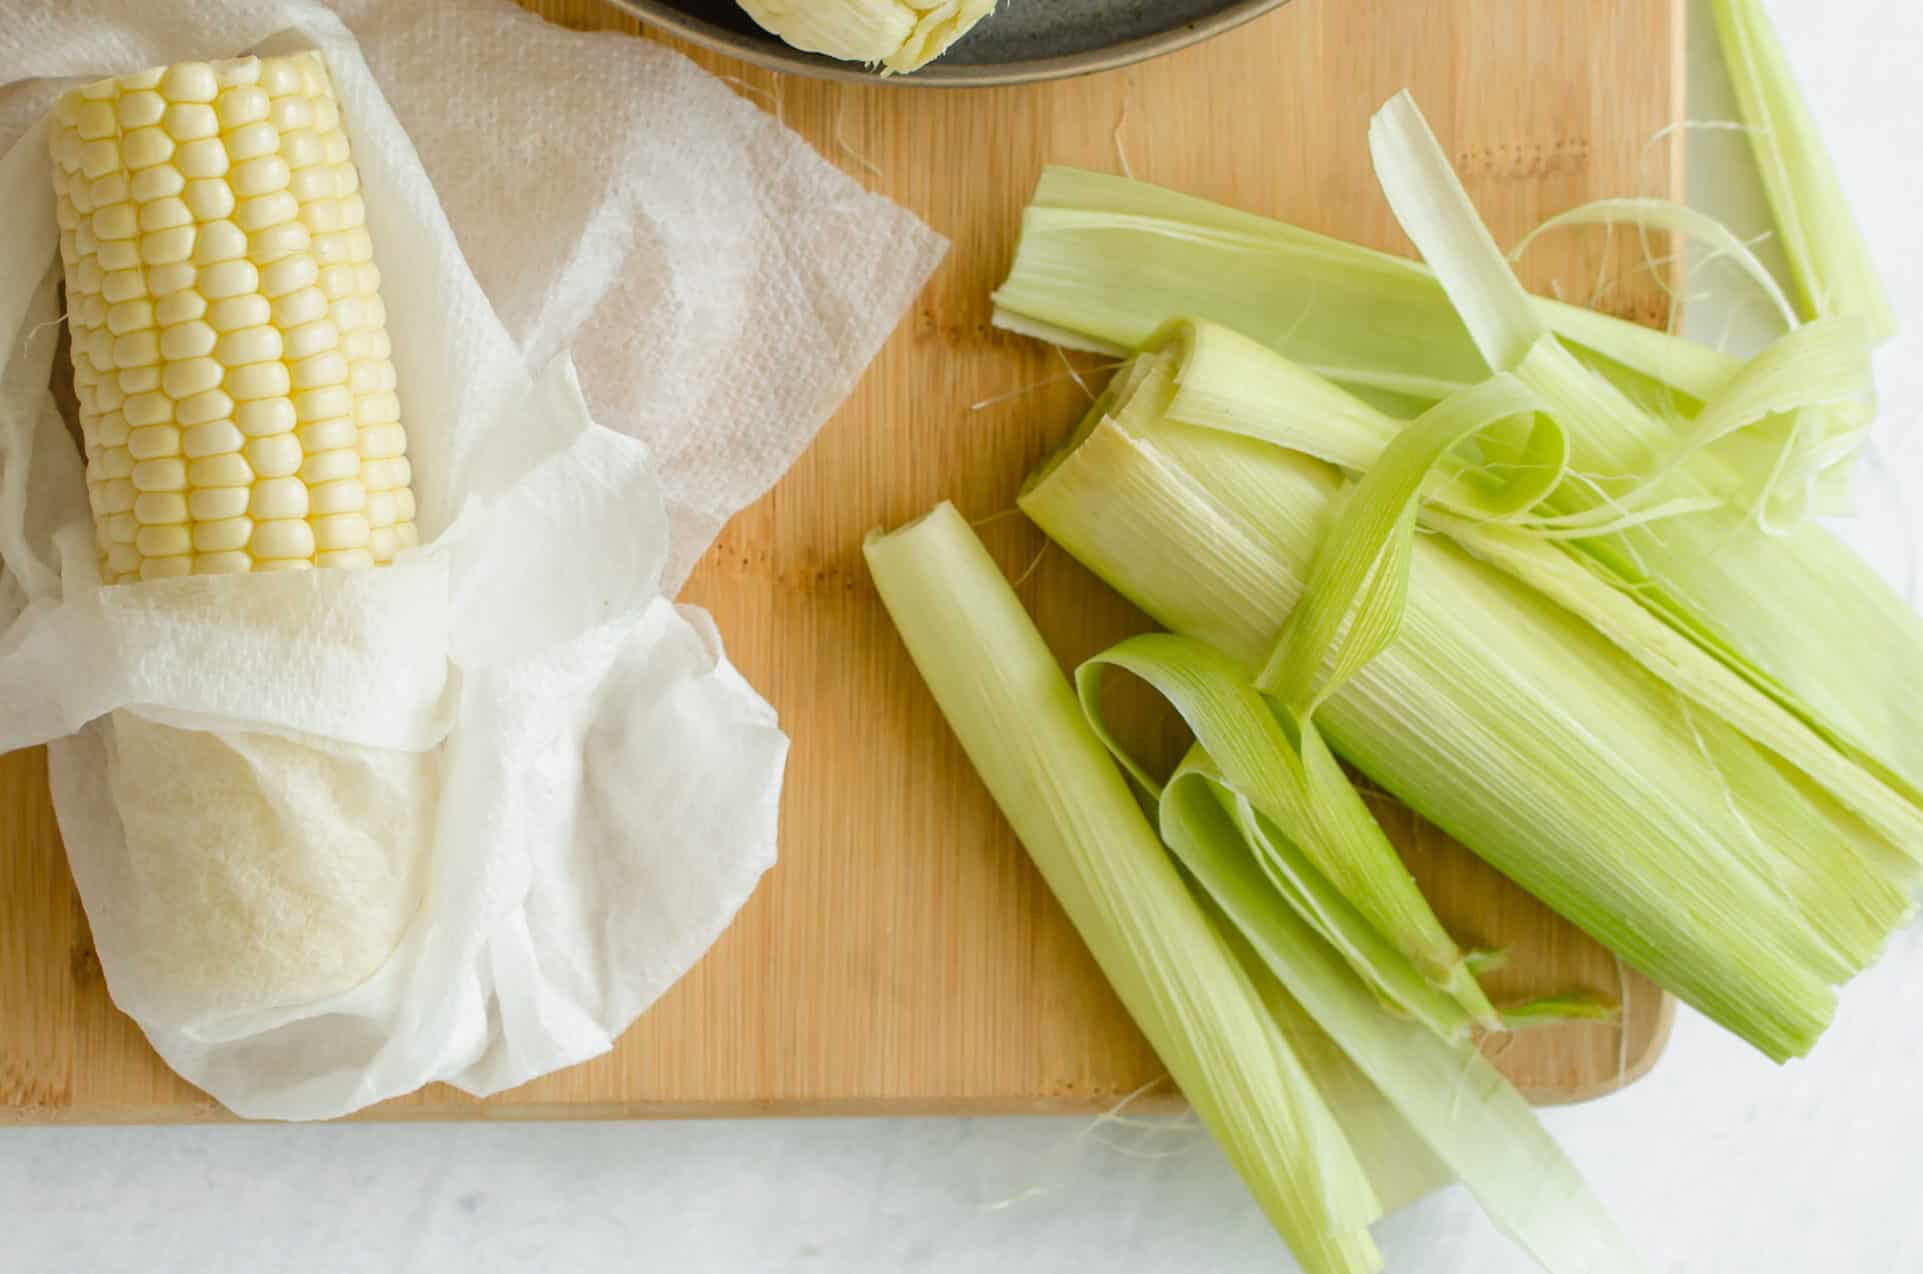 Raw corn without husk wrapped in a damp paper towel